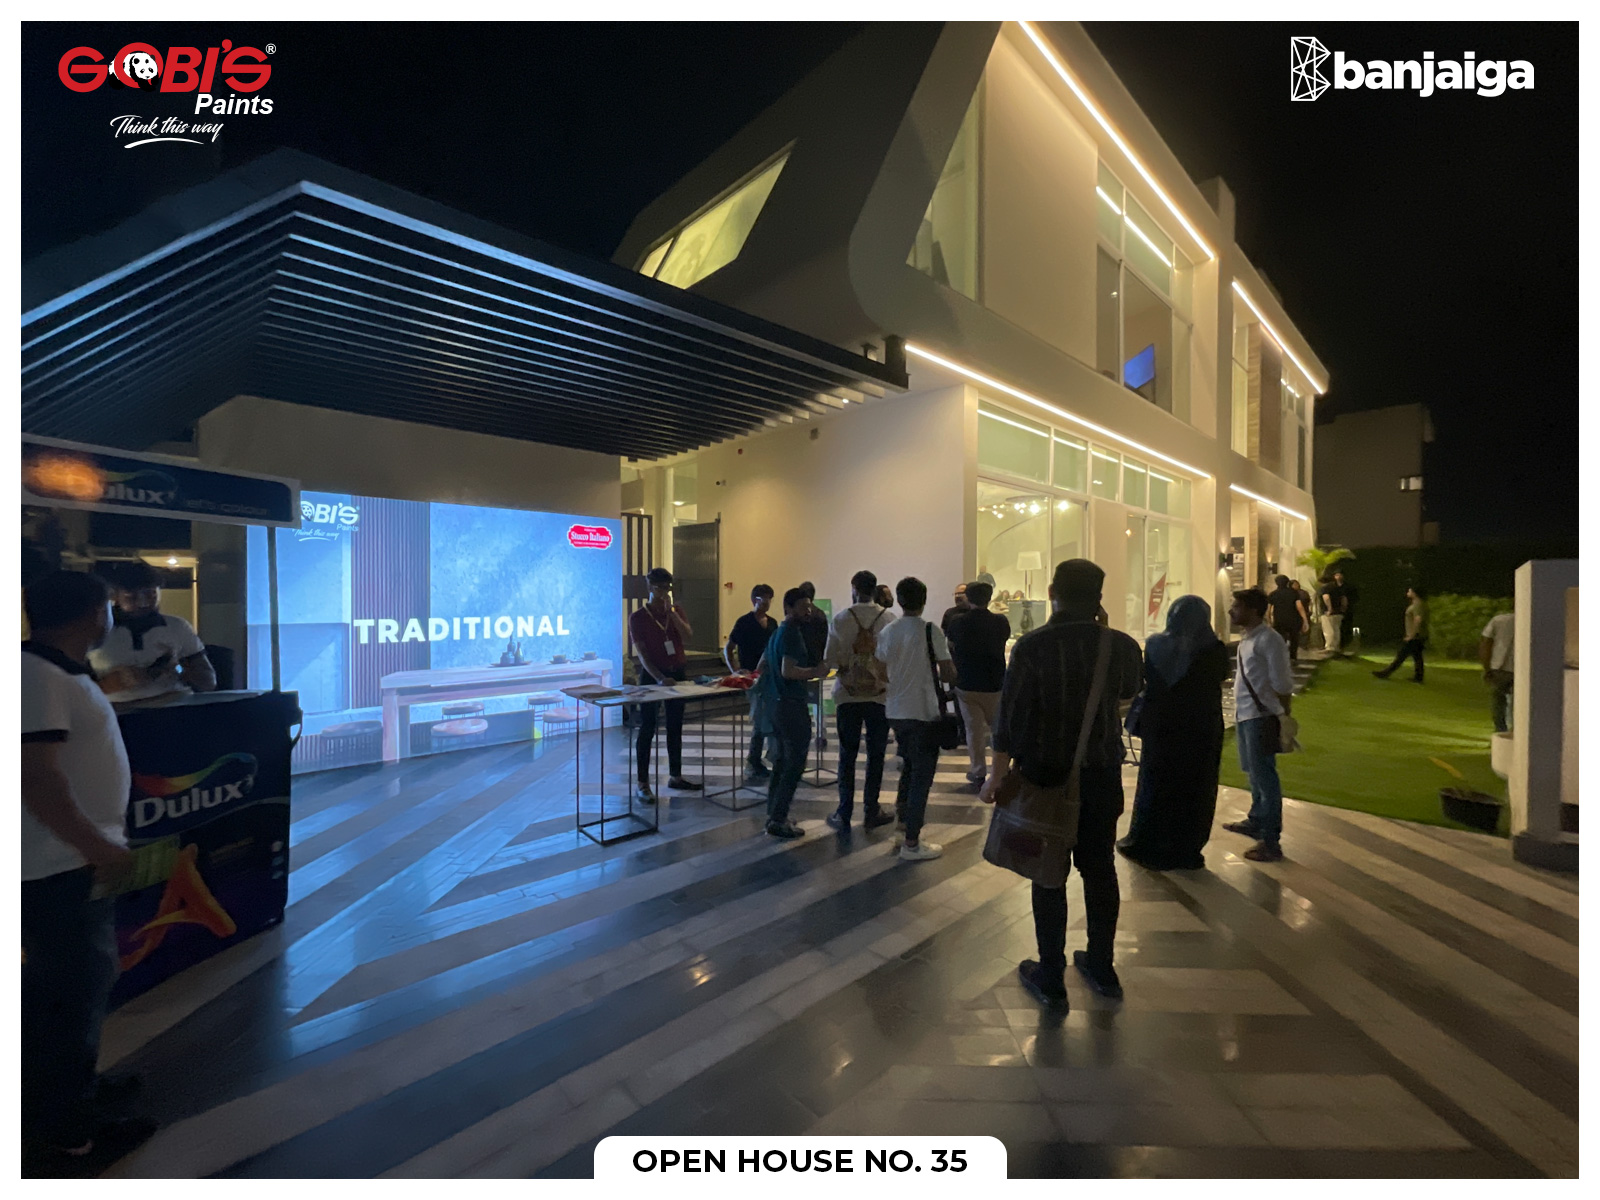 Banjaiga’s Open House 35 features Residence 512K designed by Architect Isbah Hassan (Isbah Hassan & Associates)